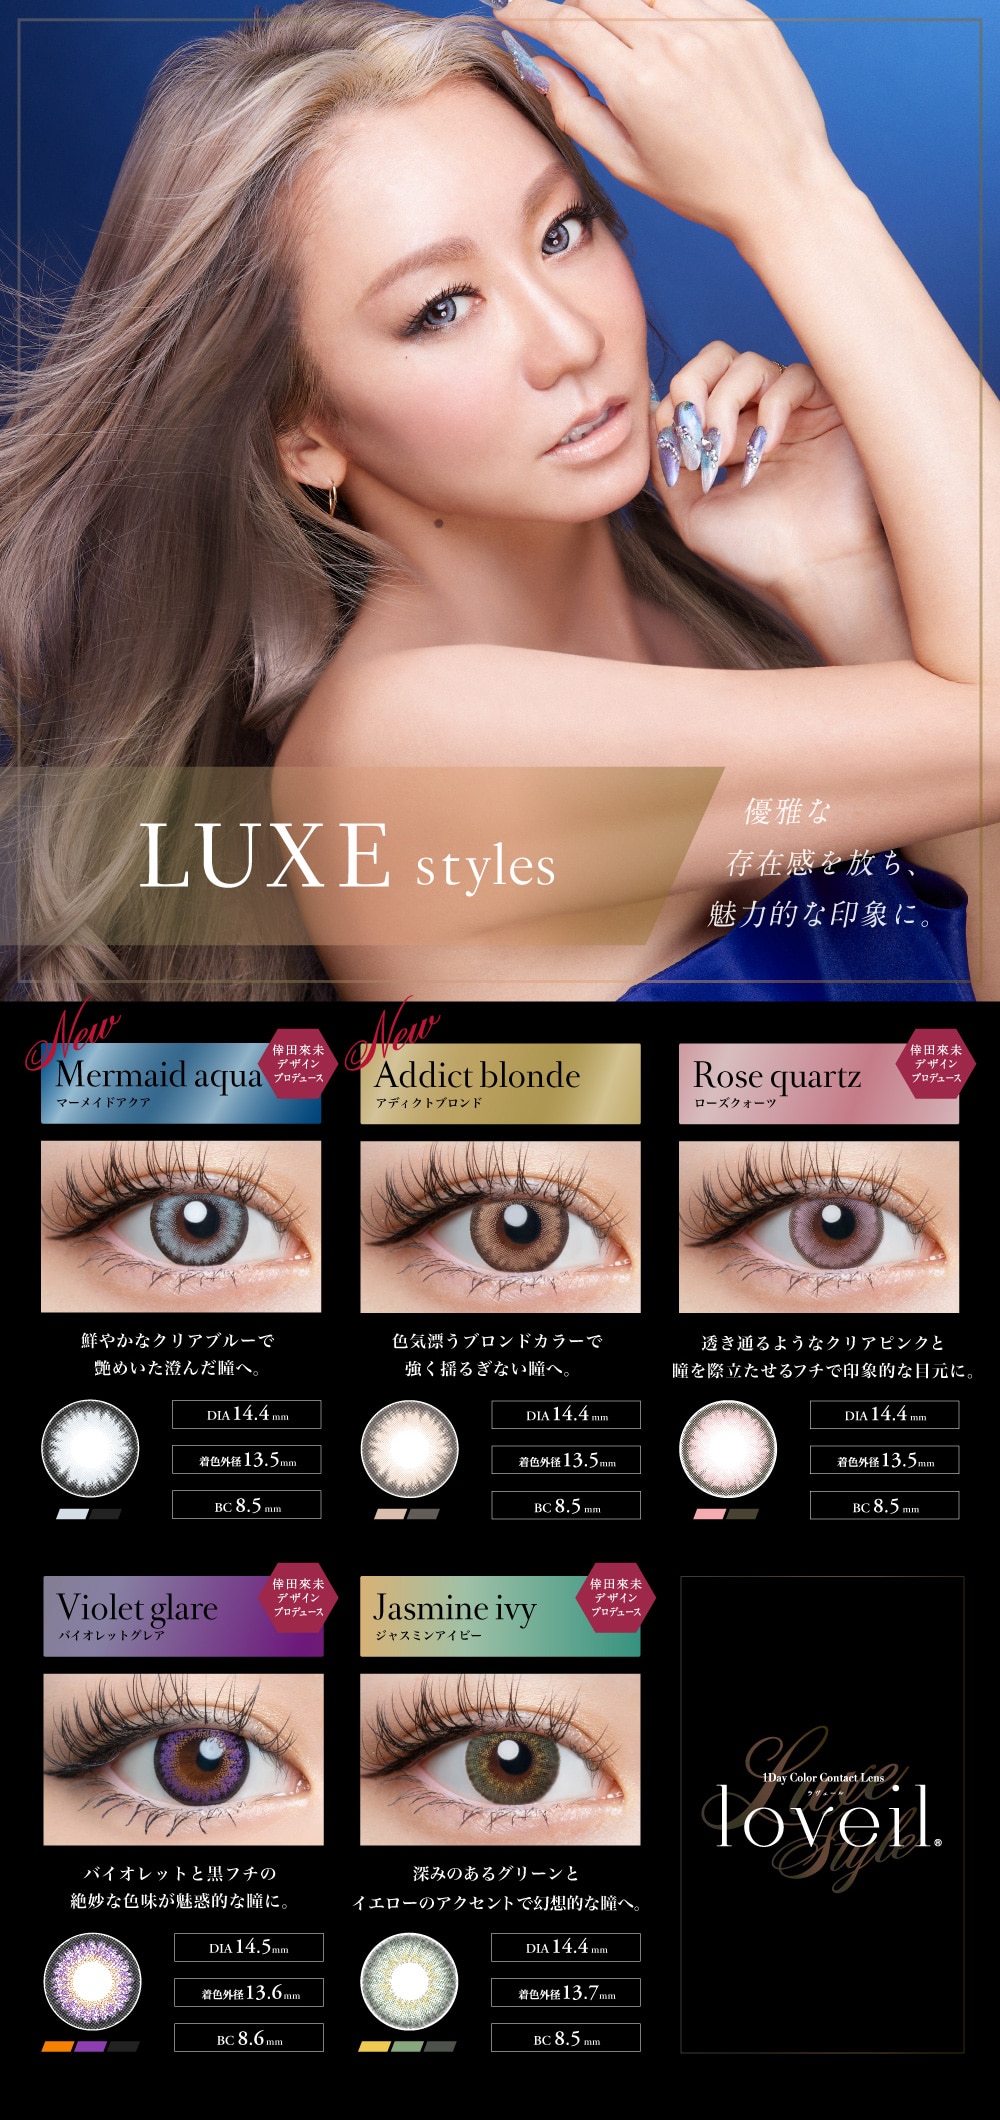 loveil ラヴェール LUXE styles